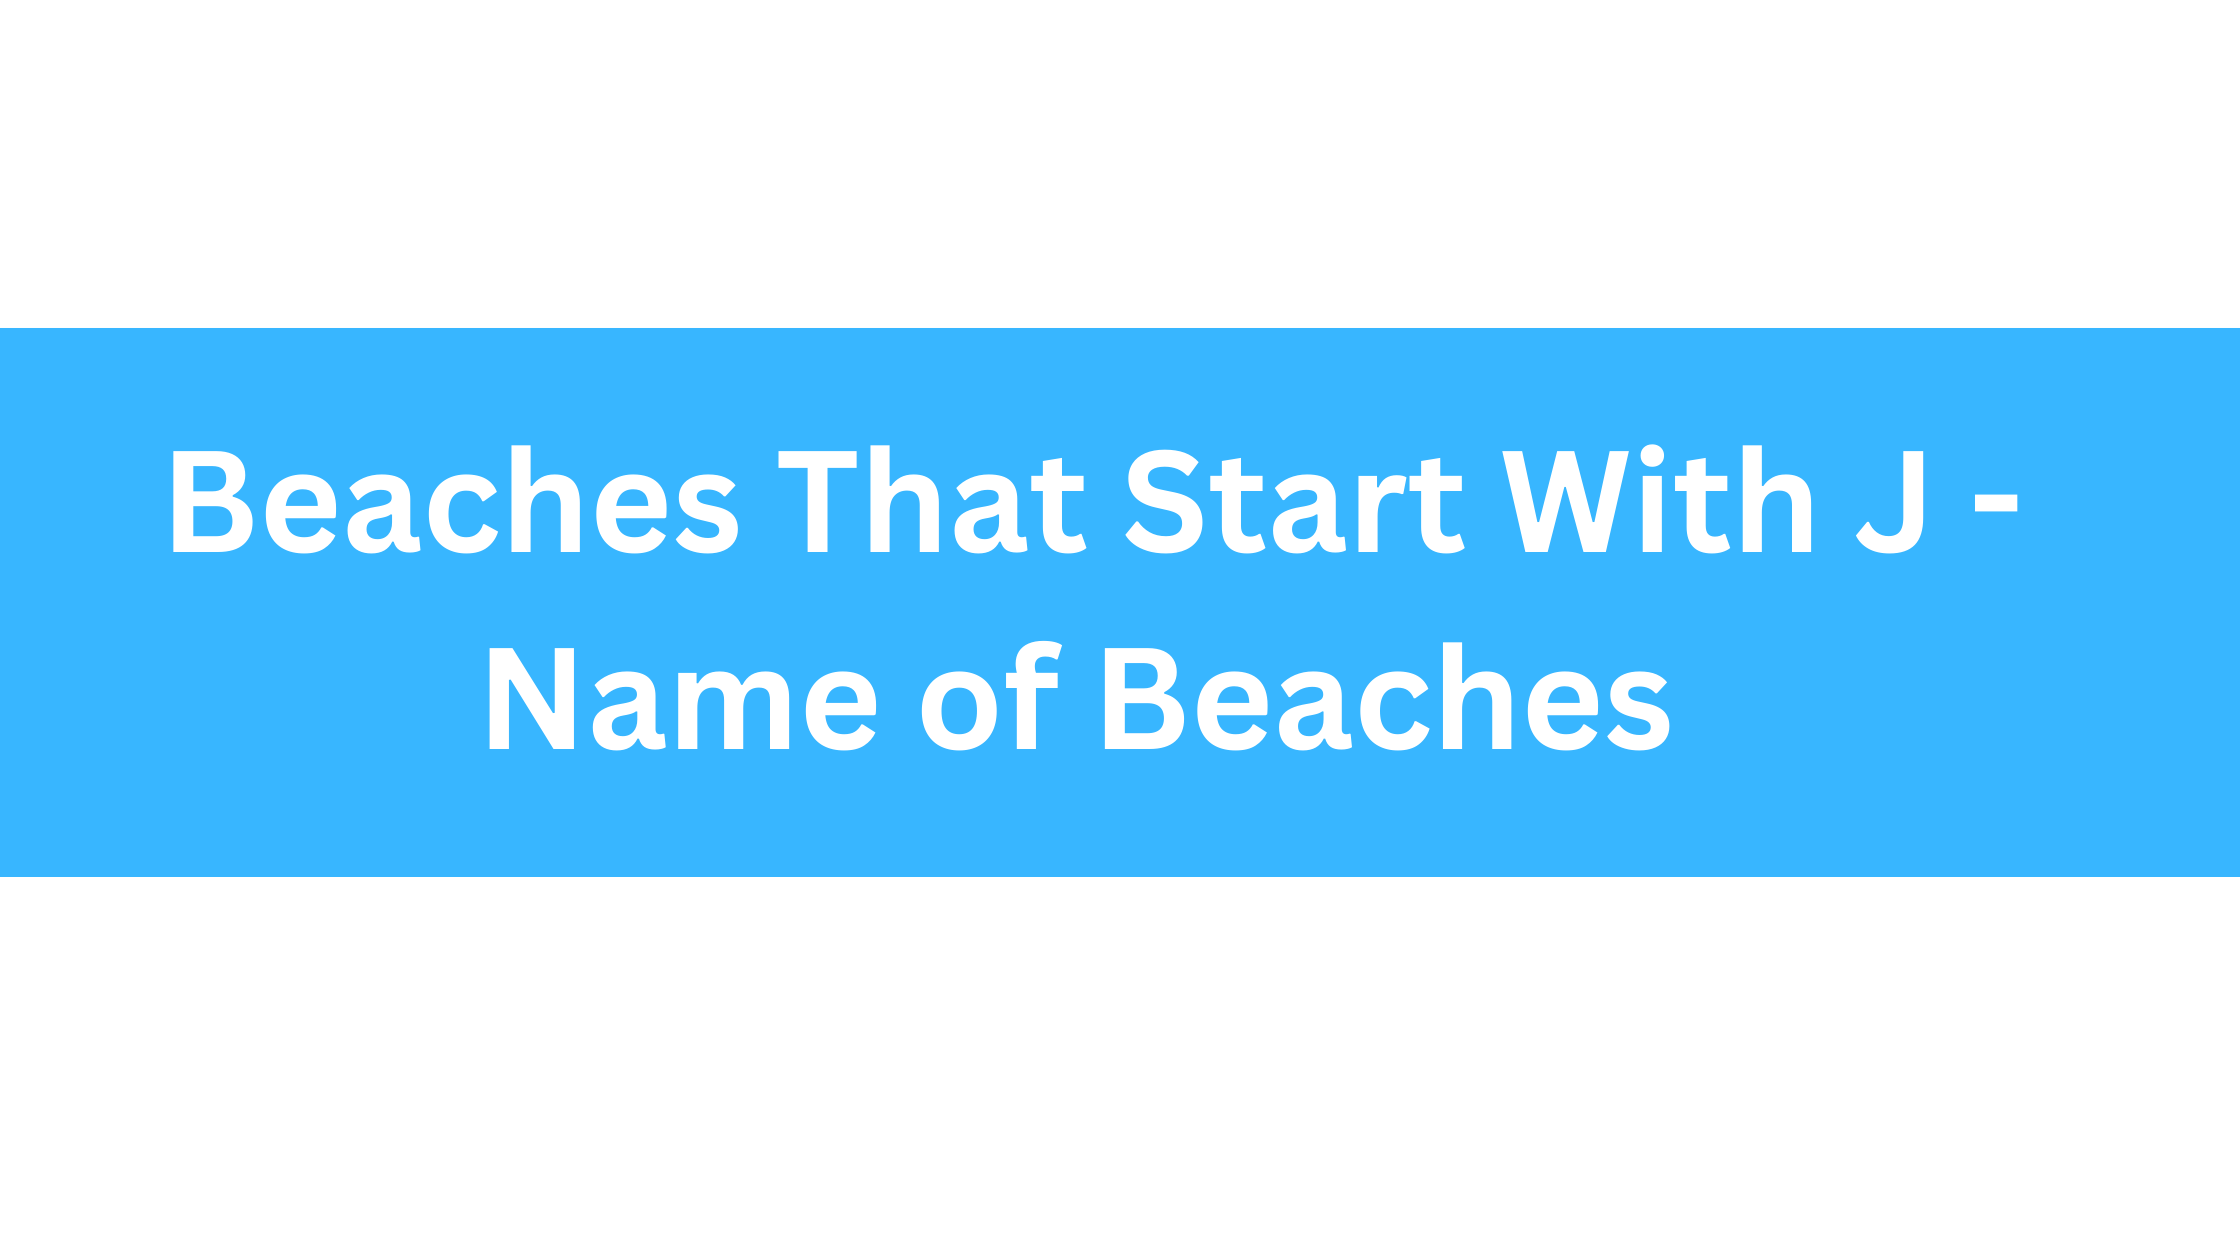 Beaches That Start With J